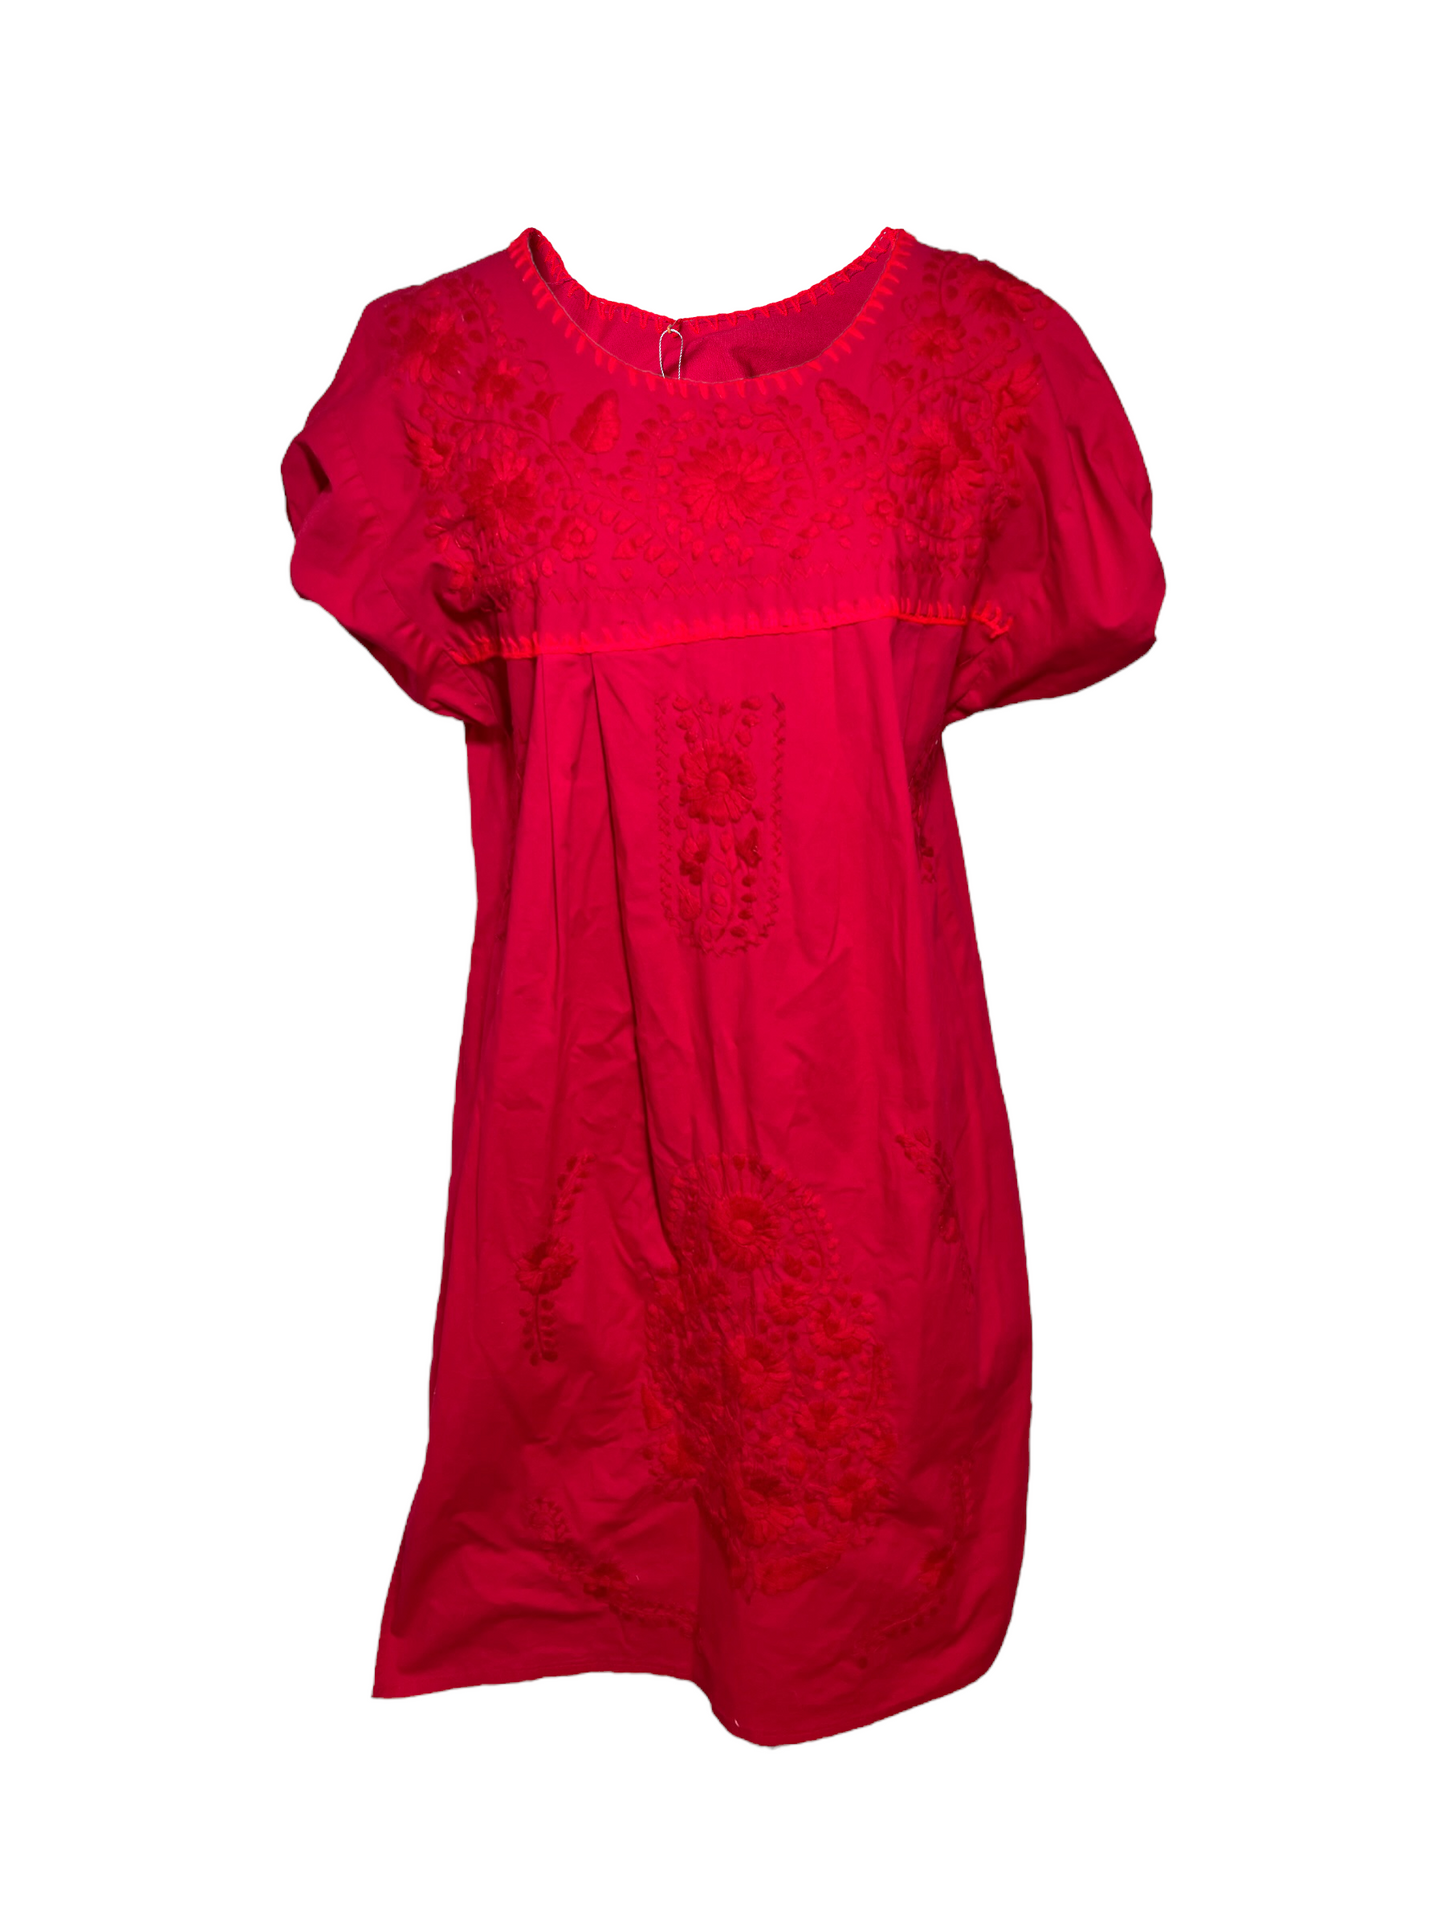 Vintage Unsigned Embroidered Red Dress